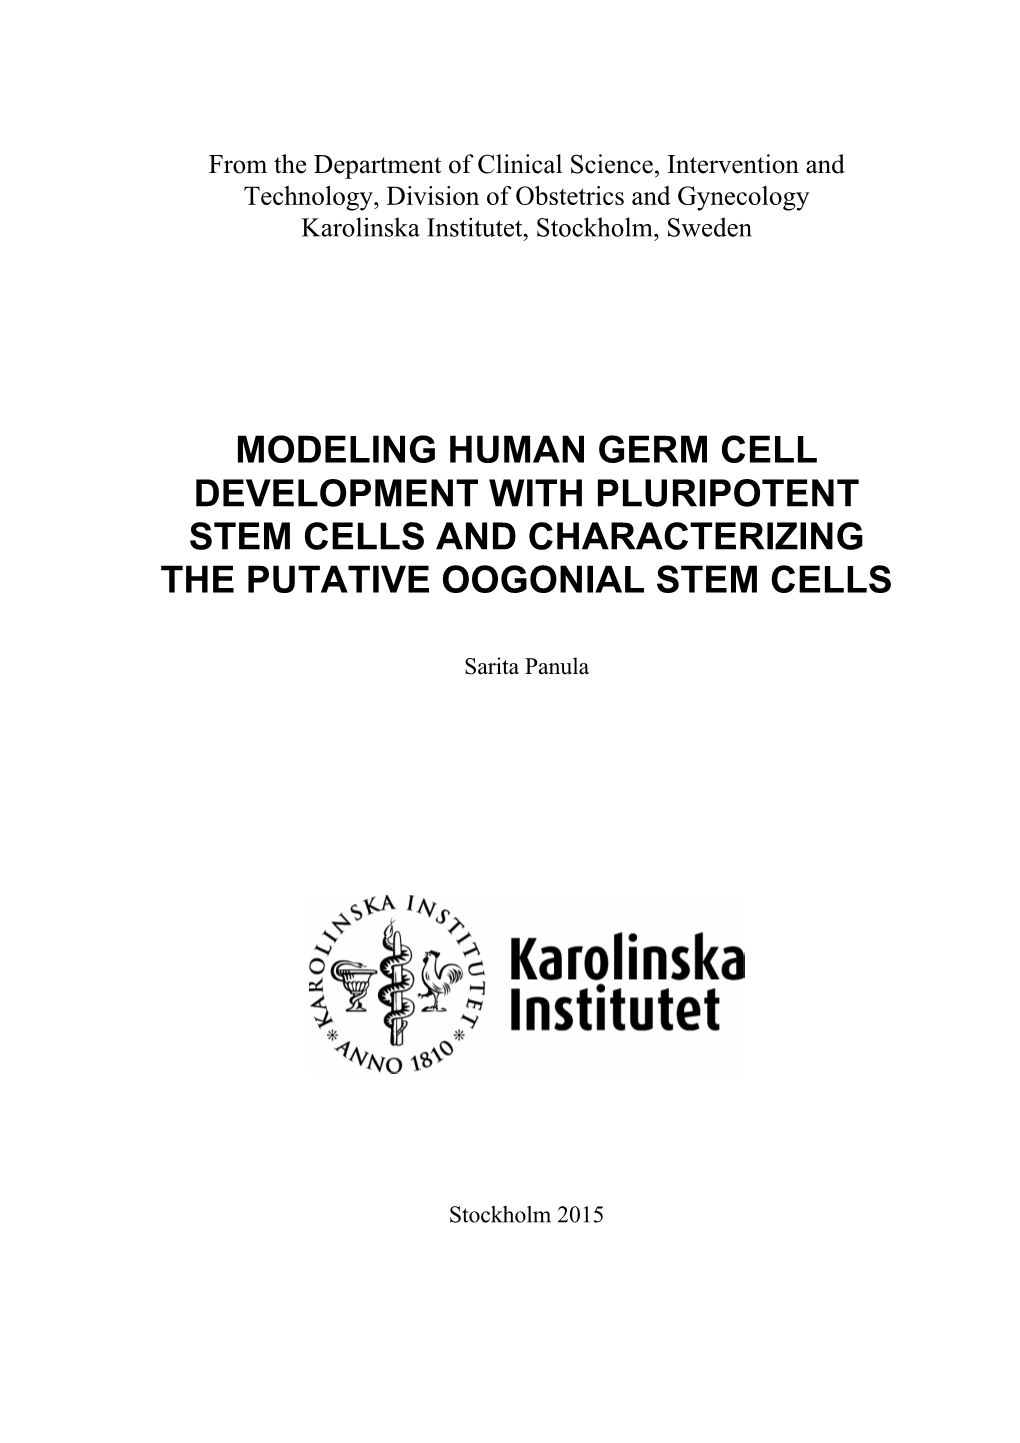 Modeling Human Germ Cell Development with Pluripotent Stem Cells and Characterizing the Putative Oogonial Stem Cells